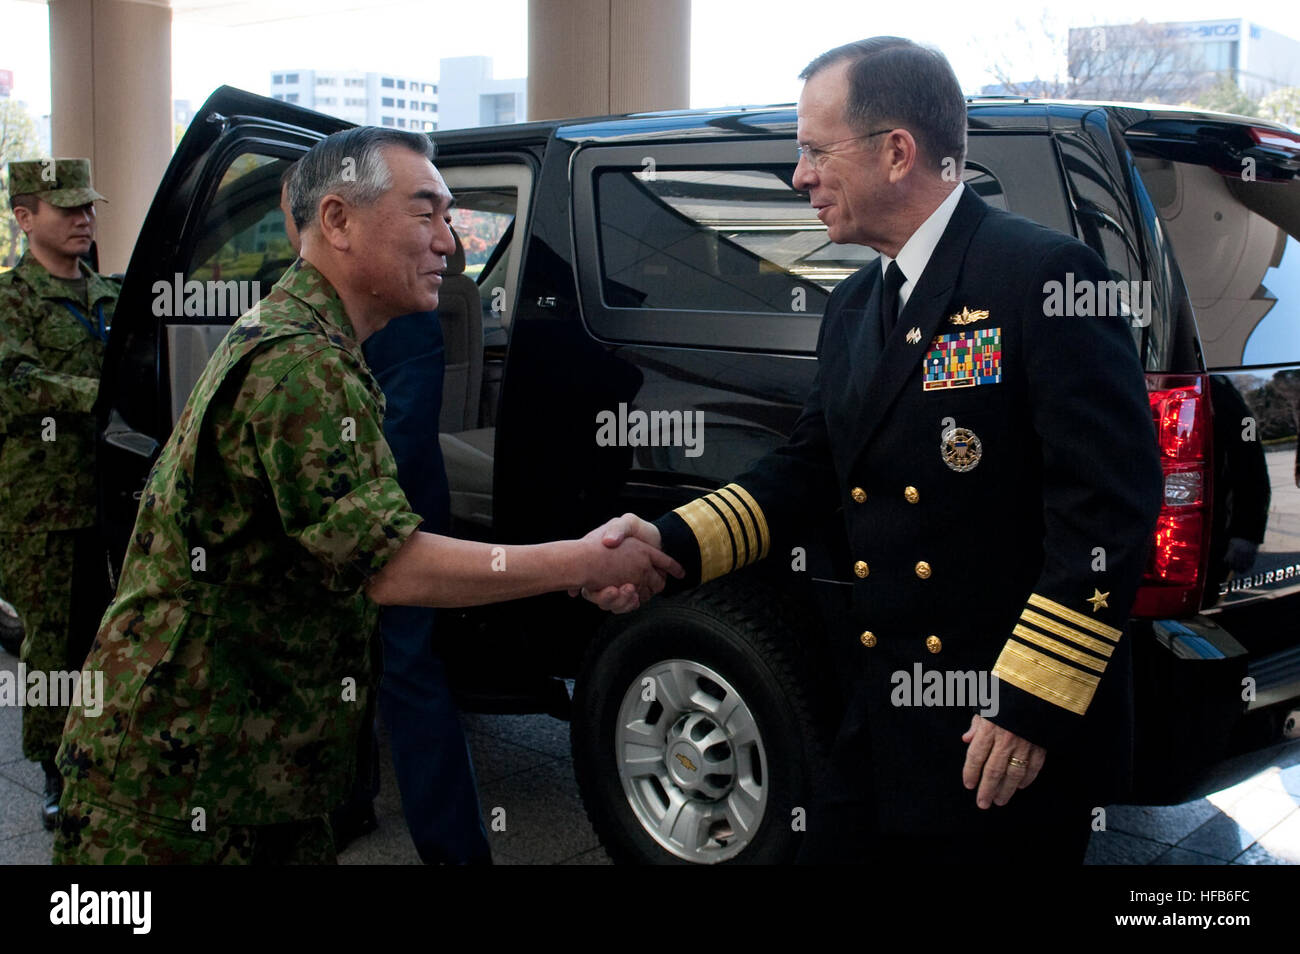 101209-N-0696M-103       Chairman of Japan's Joint Chiefs of Staff Gen. Ryoichi Oriki greets Chairman of the Joint Chiefs of Staff Adm. Mike Mullen in Tokyo, Japan, on Dec. 9, 2010.  Mullen traveled to Japan to meet with defense officials there reassuring the strength of the U.S.-South Korean alliance amid escalating tensions on the Korean Peninsula.  DoD photo by Petty Officer 1st Class Chad J. McNeeley, U.S. Navy.  (Released) Defense.gov News Photo 101209-N-0696M-103 - Chairman of Japan s Joint Chiefs of Staff Gen. Ryoichi Oriki greets Chairman of the Joint Chiefs of Staff Adm. Mike Mullen i Stock Photo